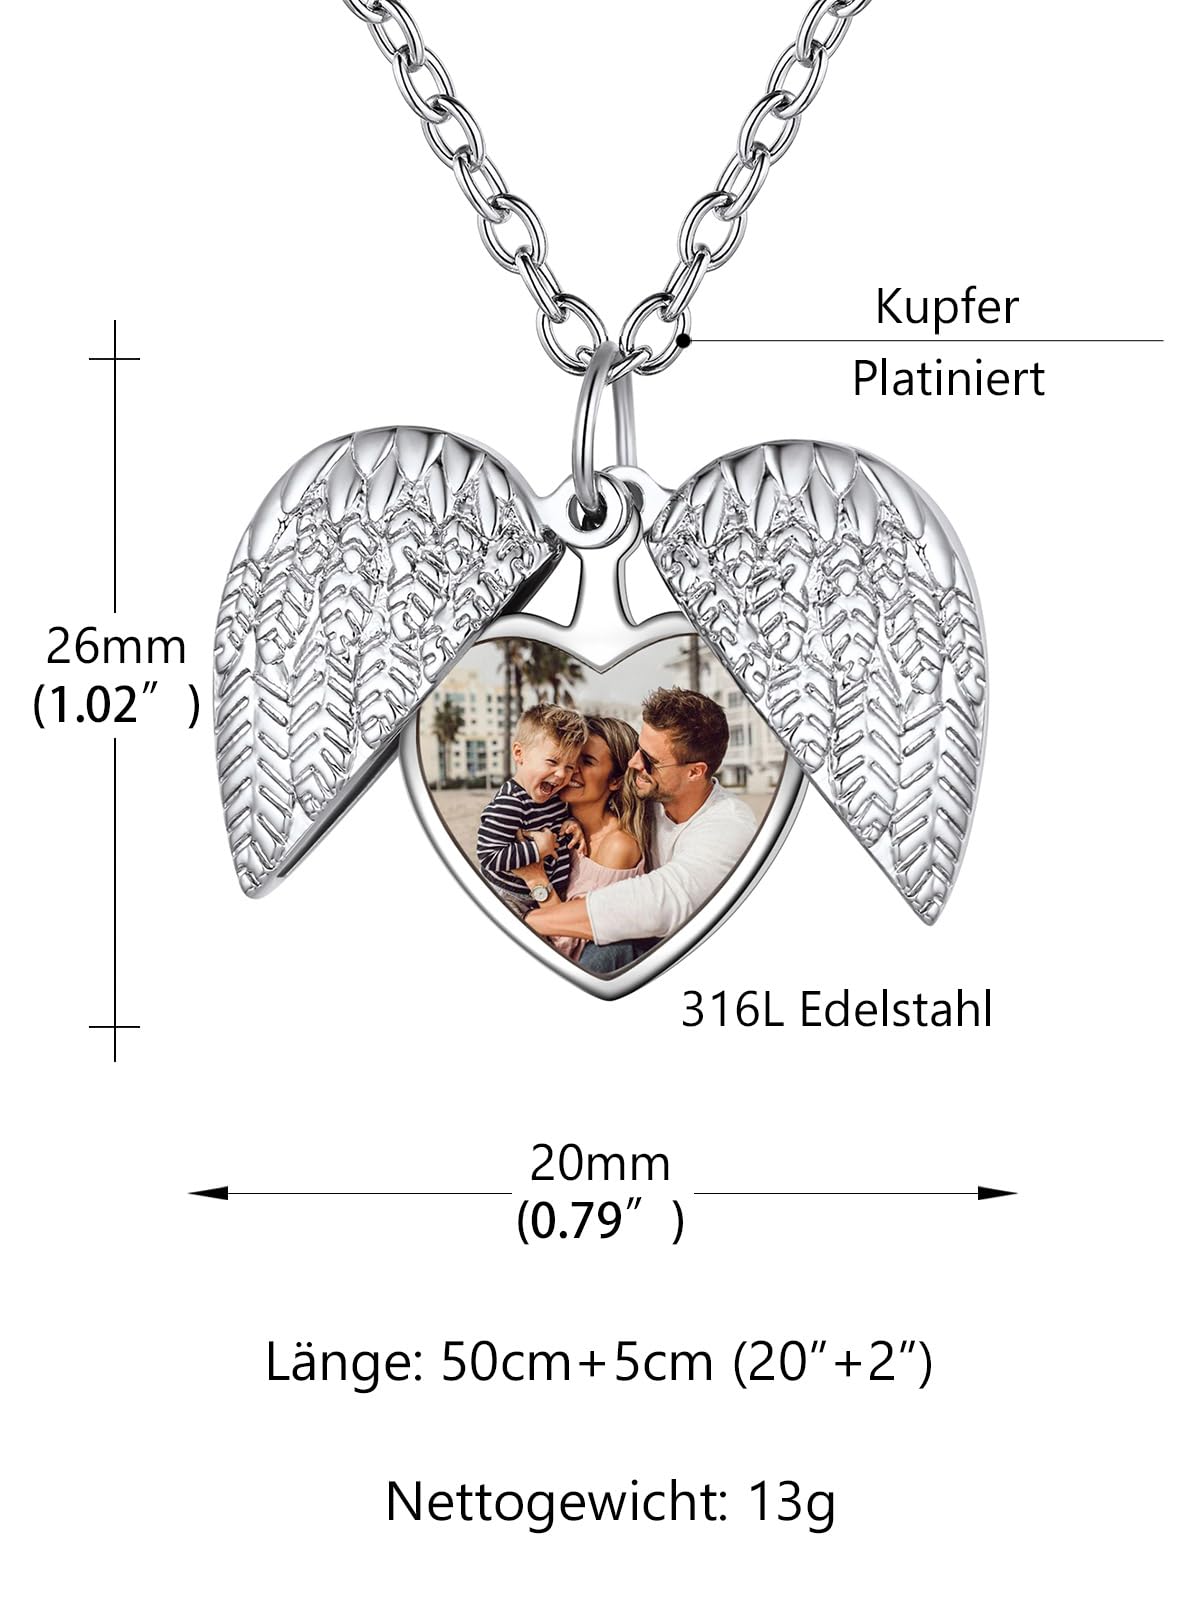 Personalised Locket Necklace Customised Photo Heart Pendant Necklaces Gift Picture and Text Engraving Jewelry for Women Girlfriend